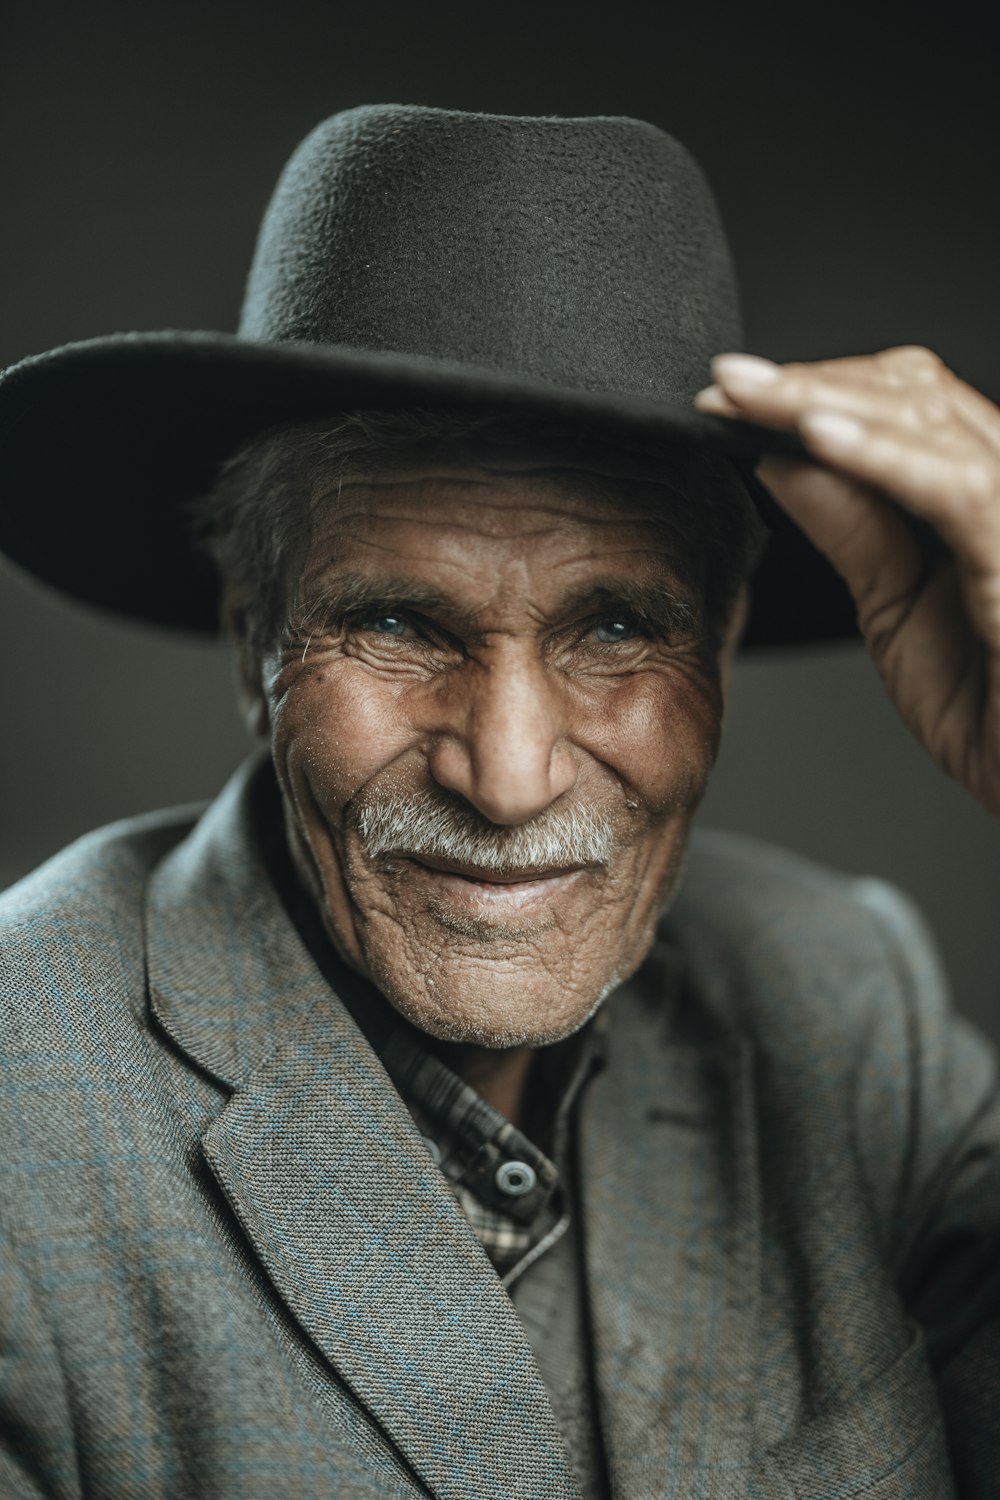 an old man wearing a hat and a suit